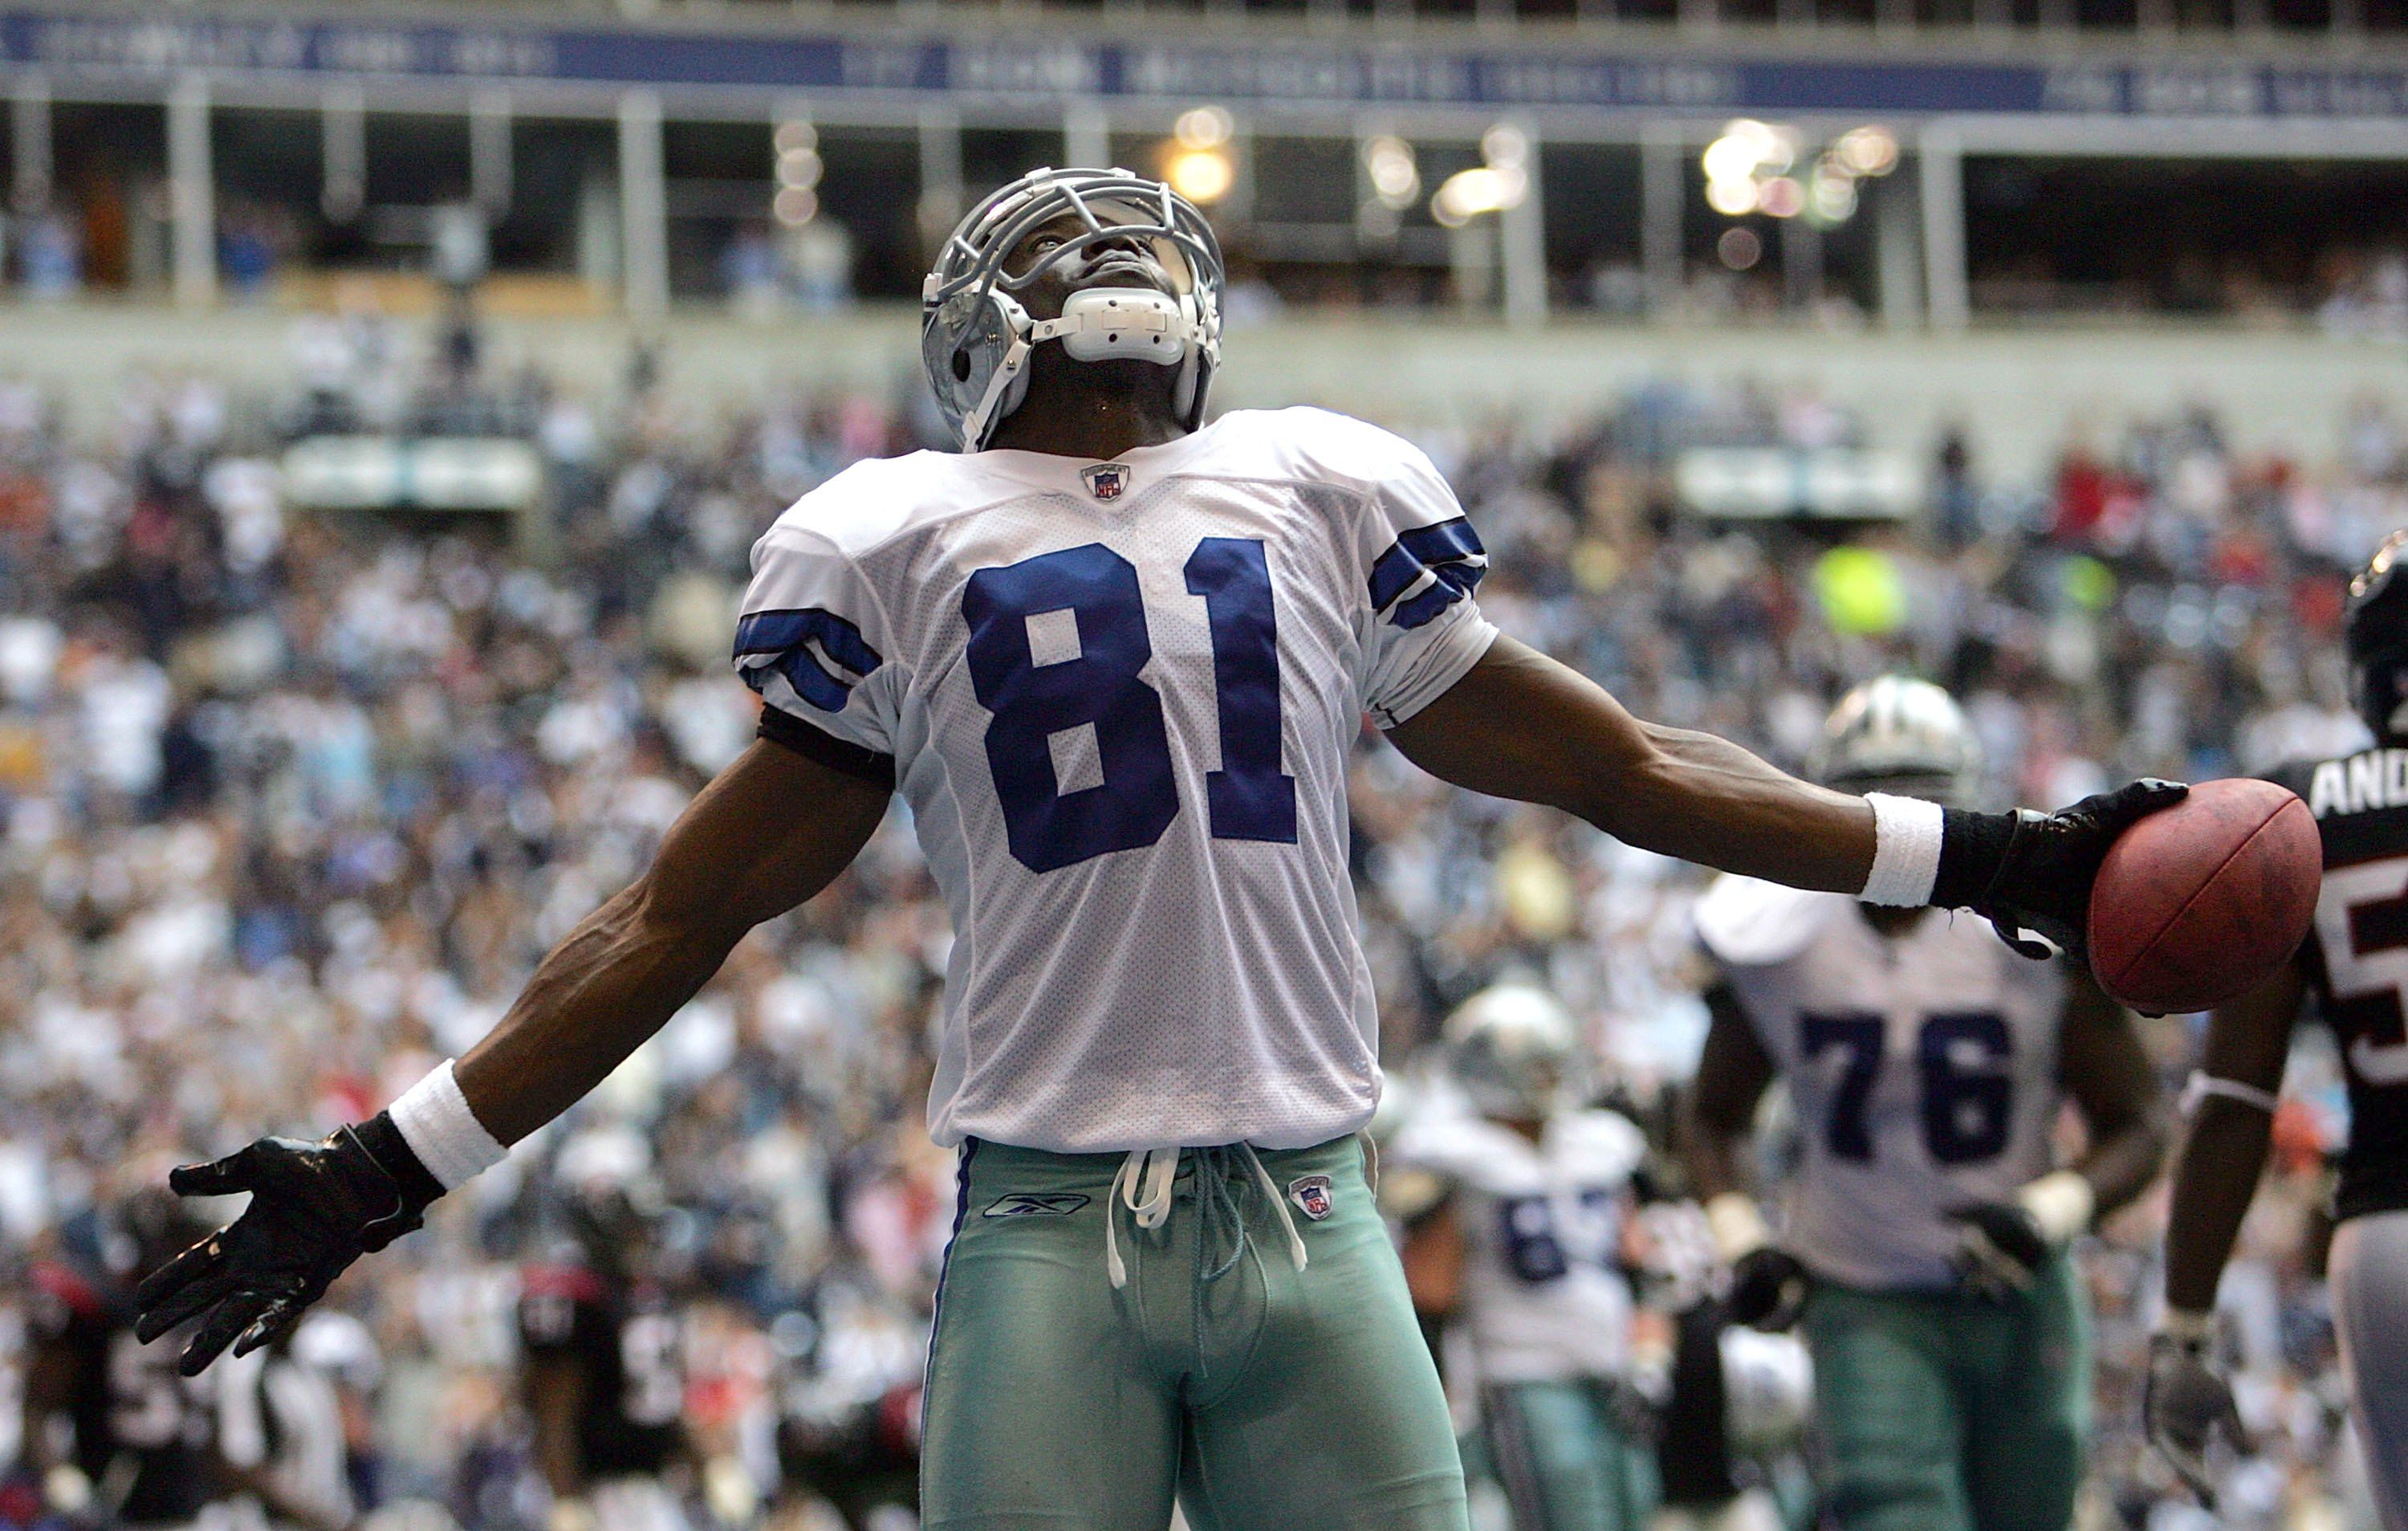 Will Terrell Owens land in the CFL?